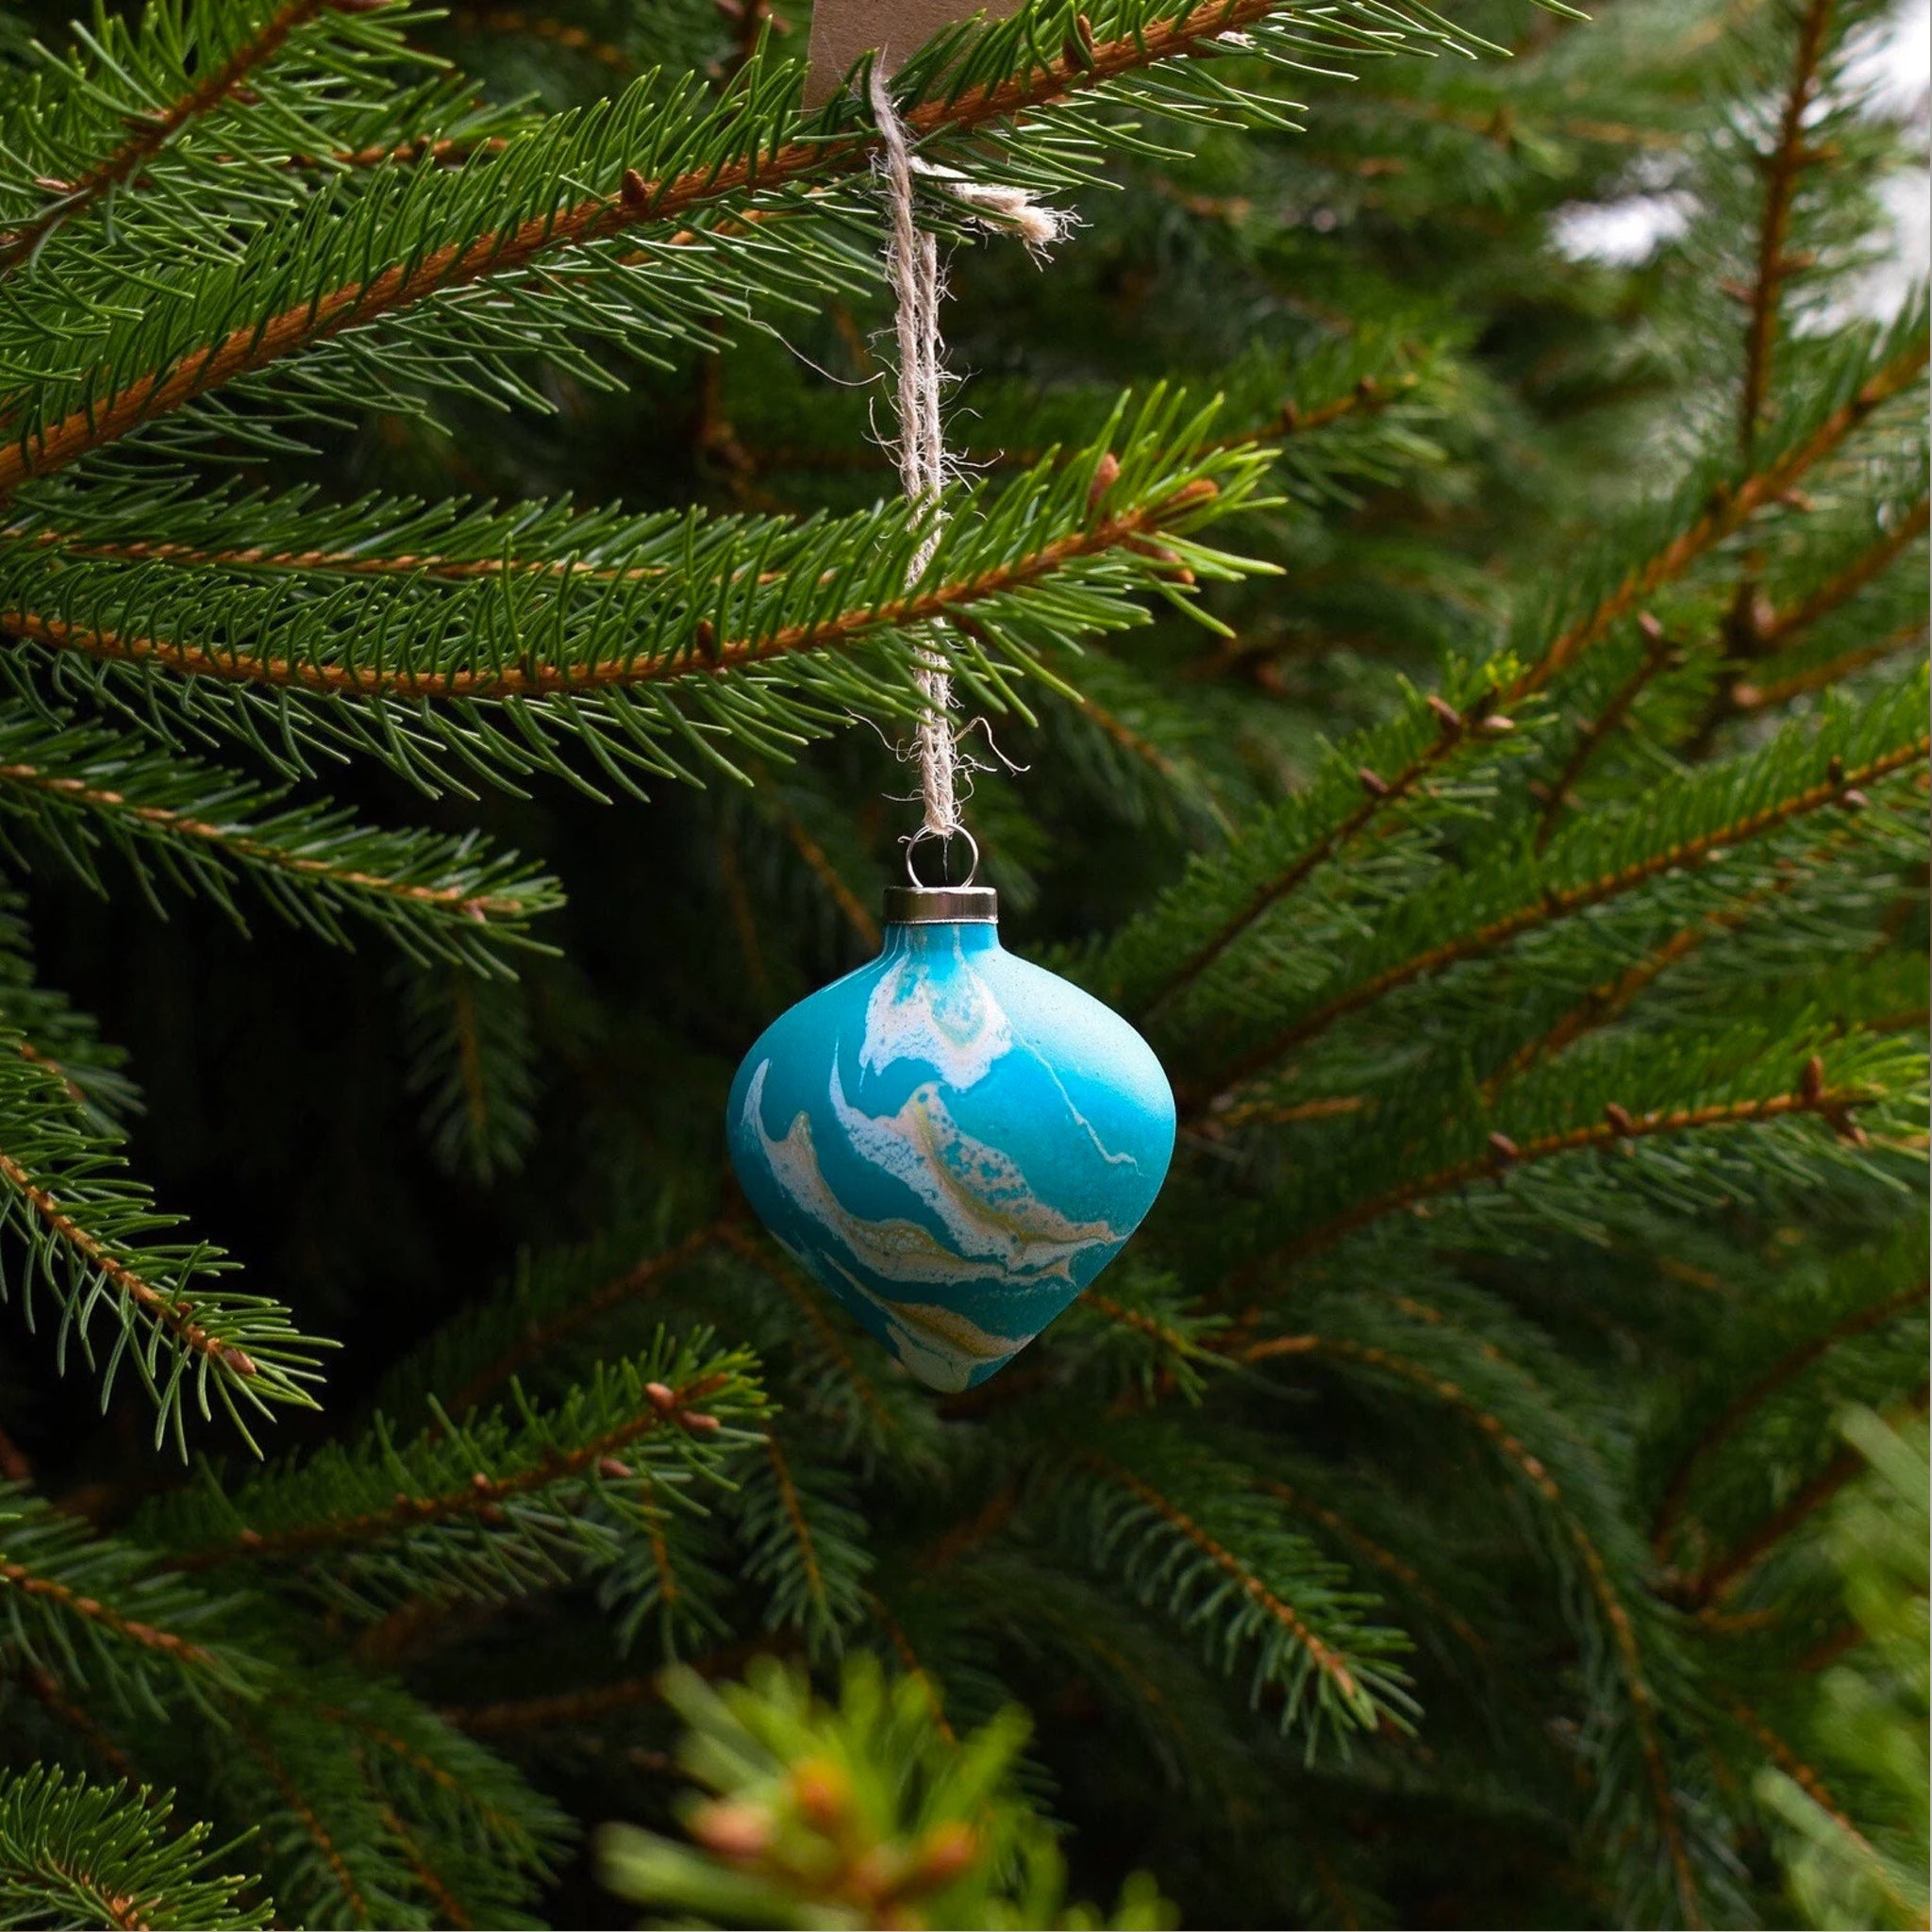 Cotswold Bauble Company Ceramic Baubles